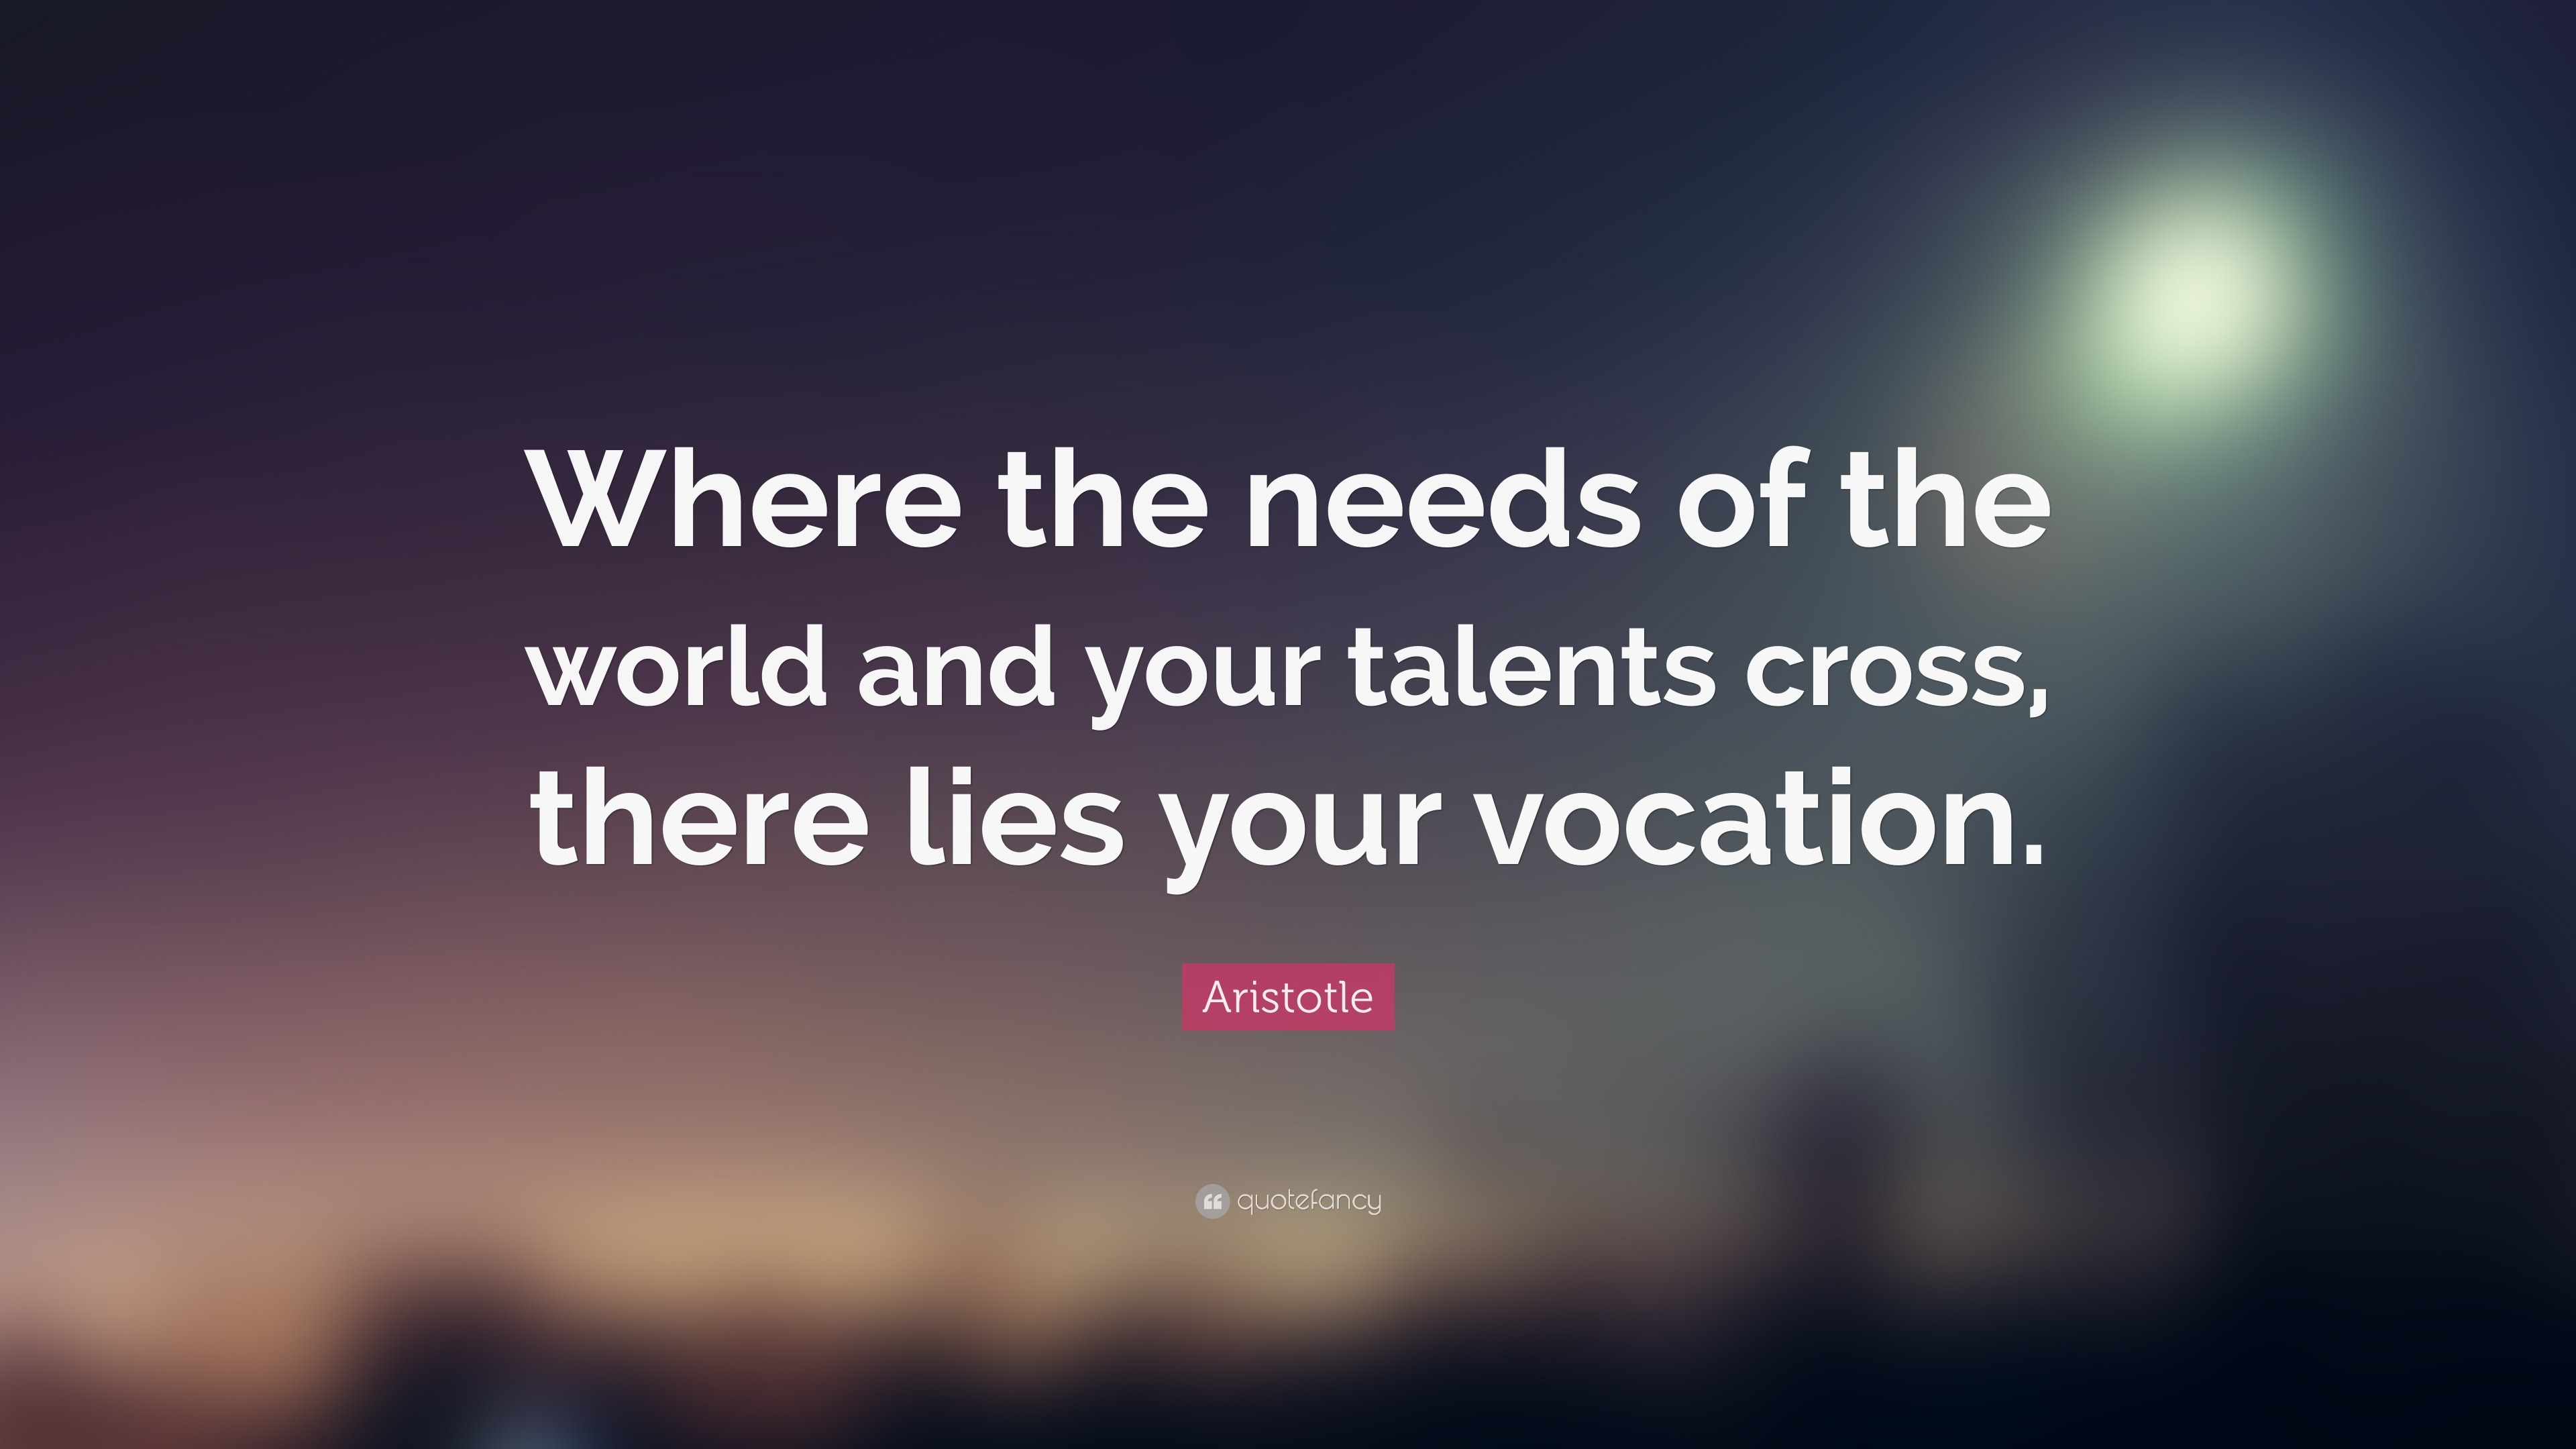 Aristotle Quote: “Where the needs of the world and your talents cross,  there lies your vocation.”